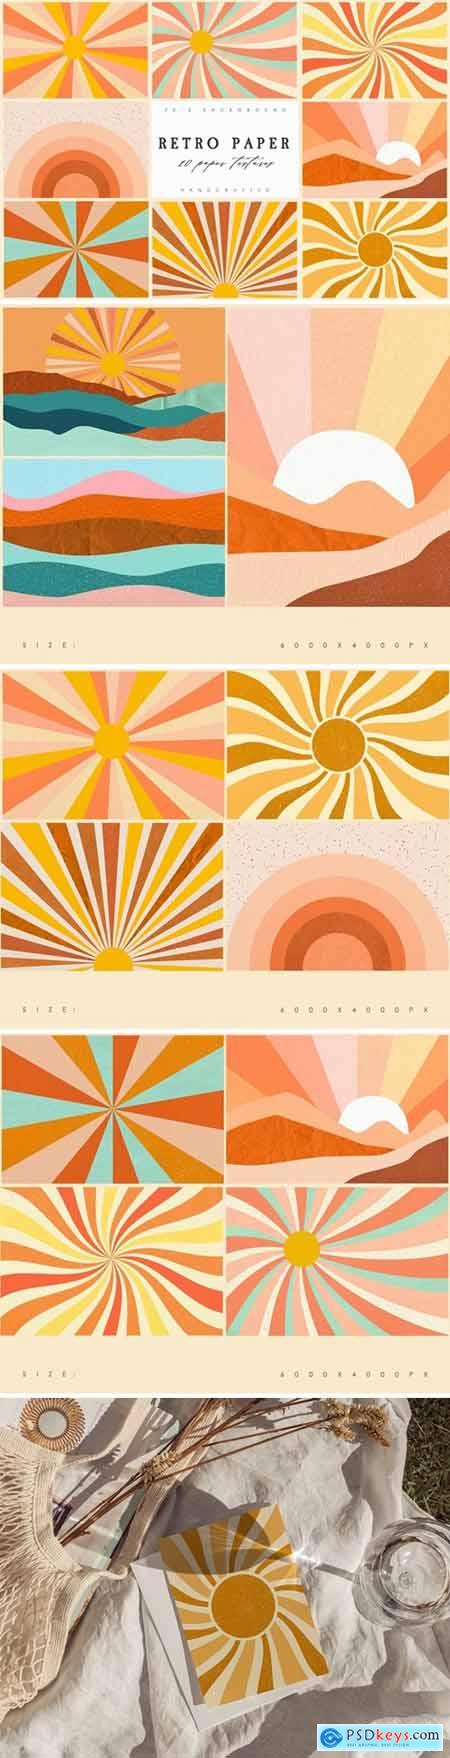 Retro Groovy Paper Backgrounds